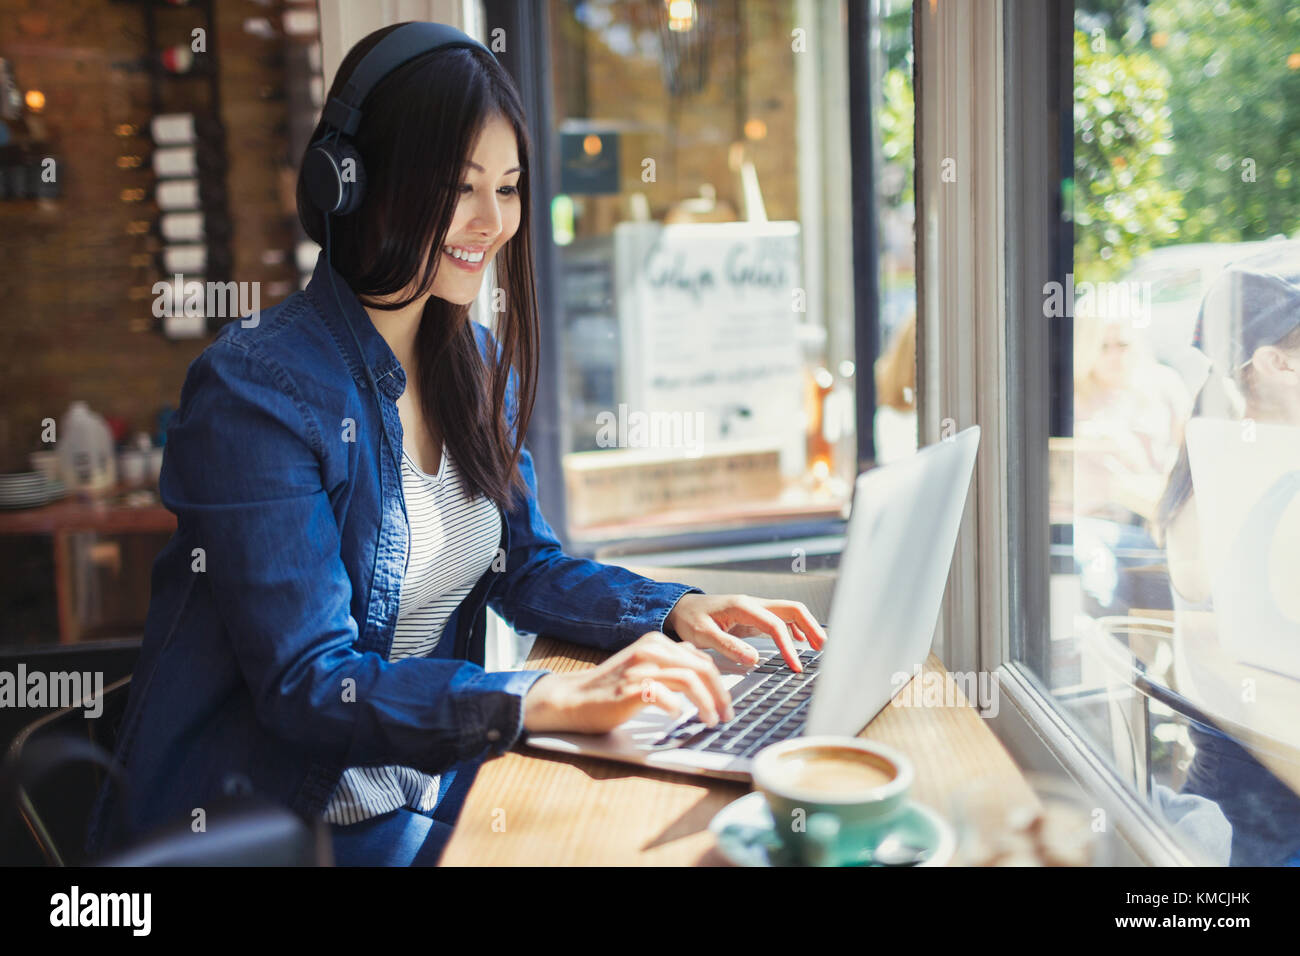 Young woman with headphones using laptop at sunny cafe window Stock Photo